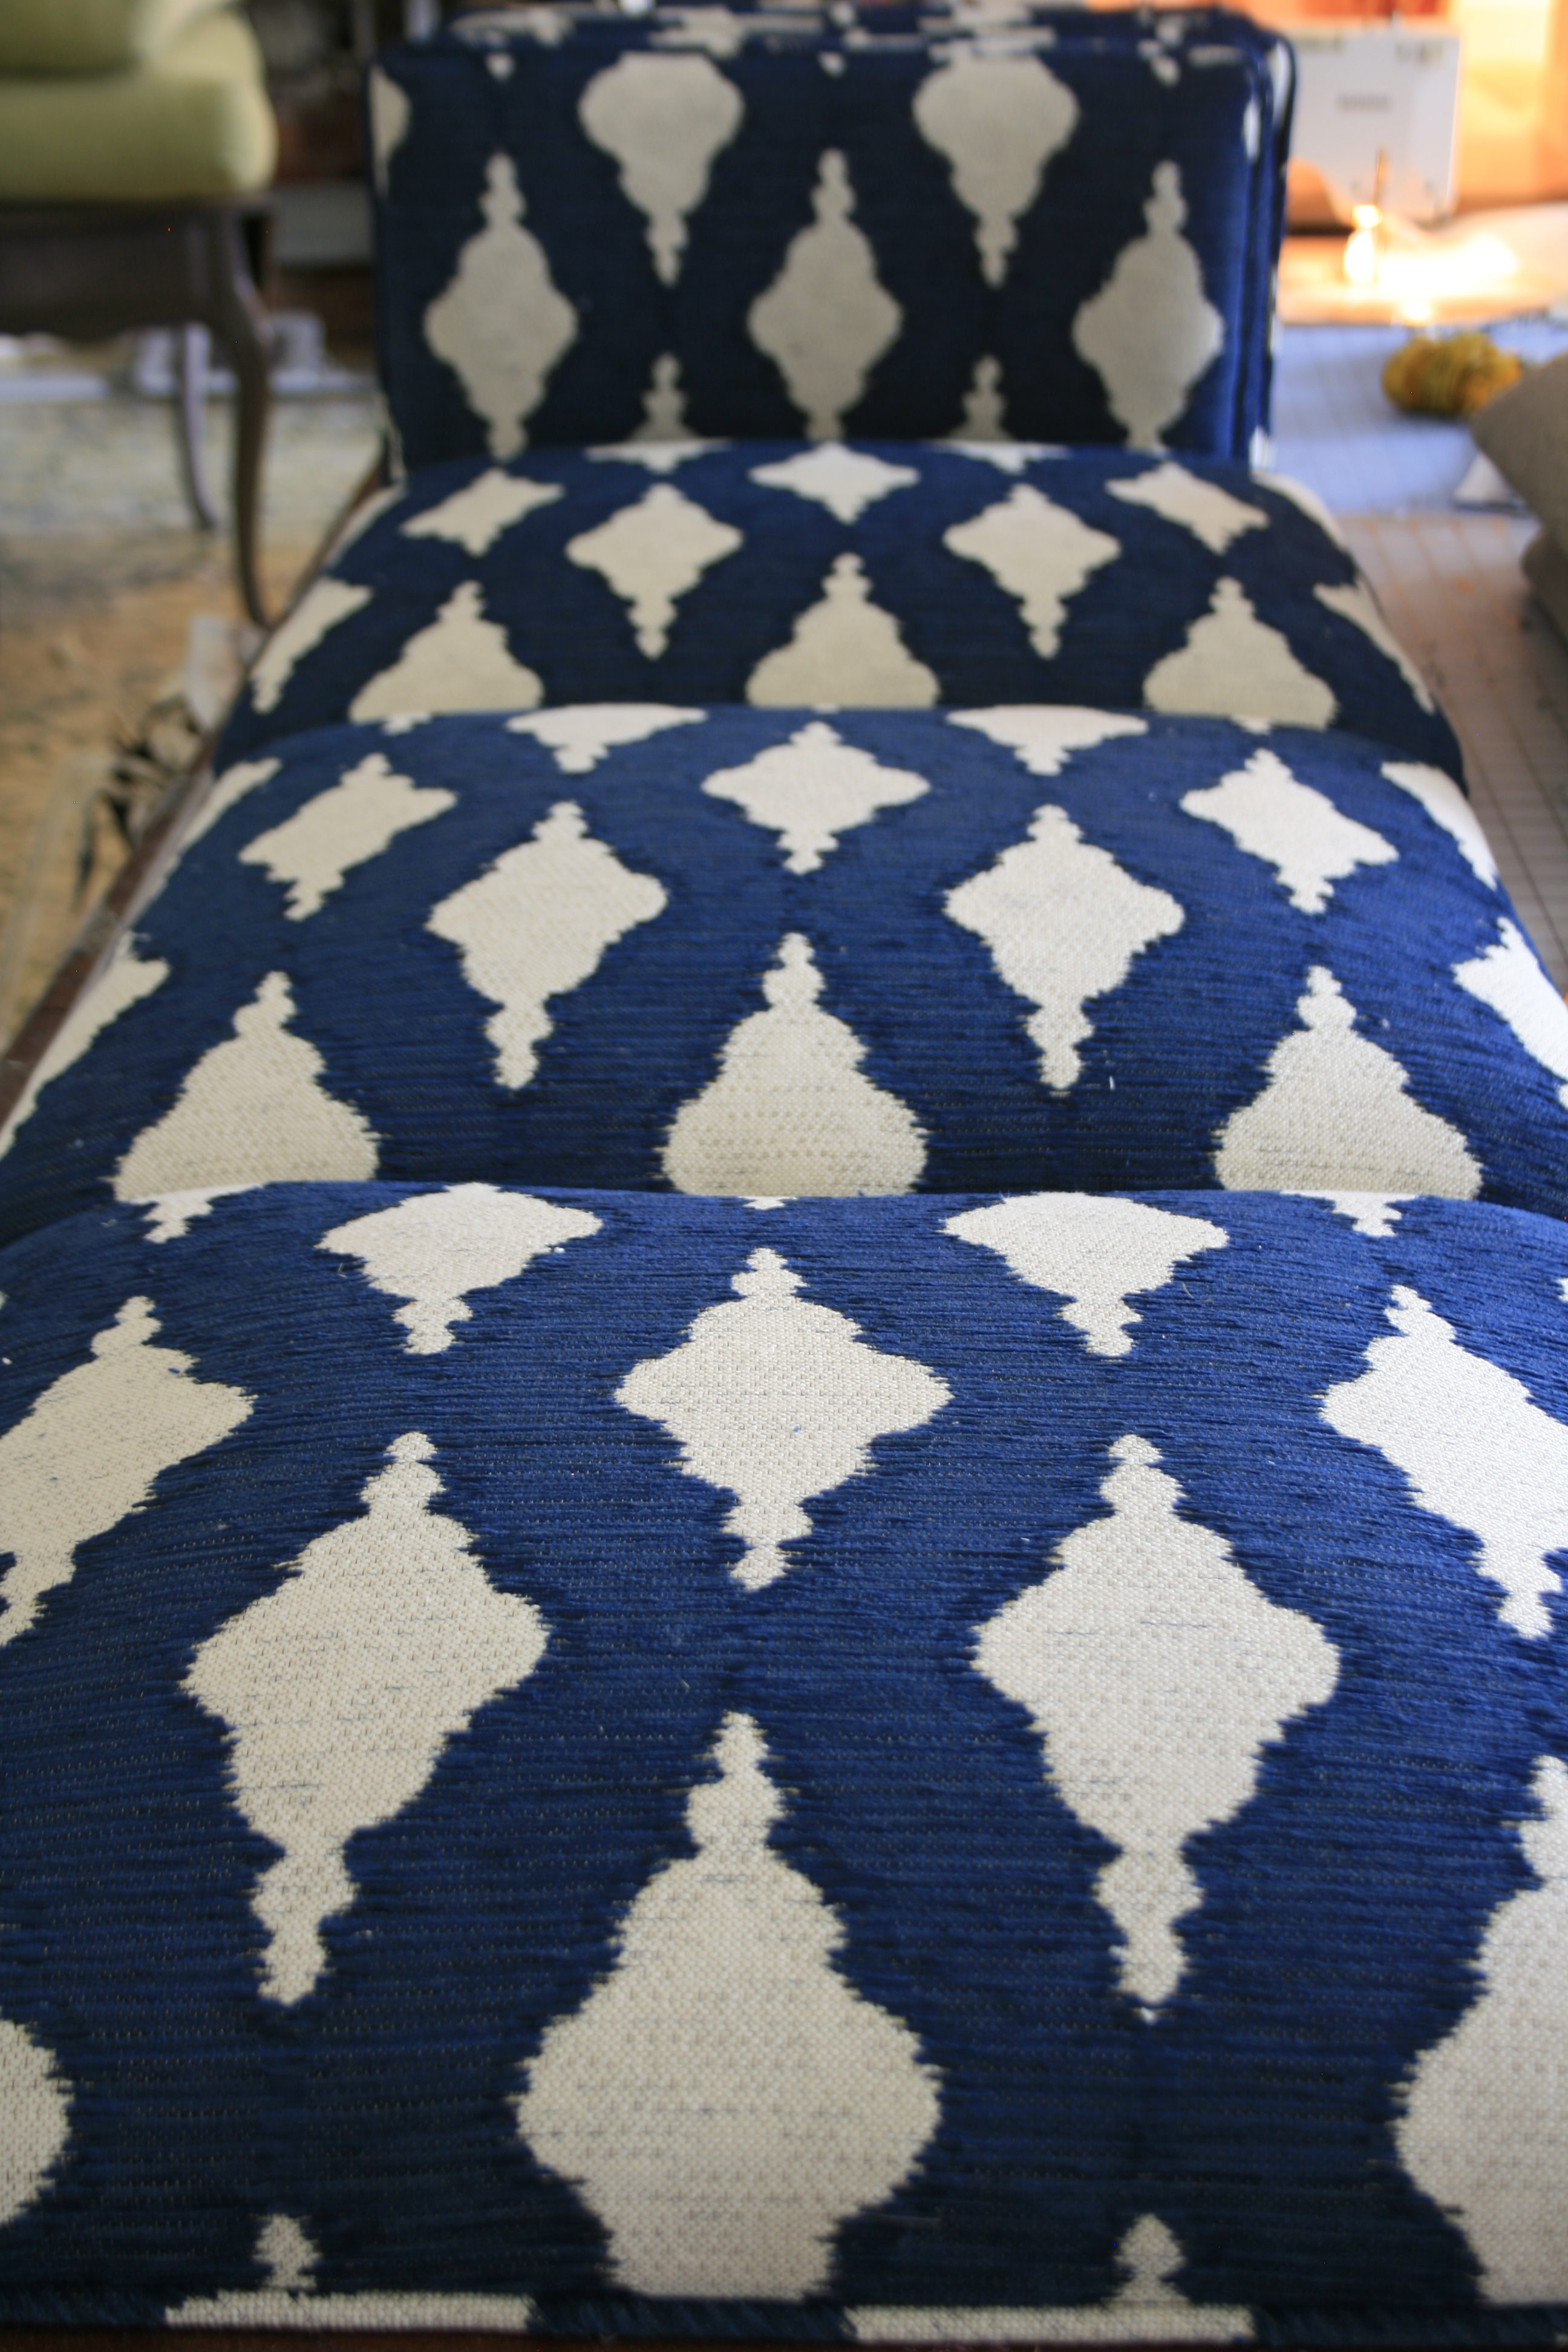 The easiest way to match pattern on chair seats